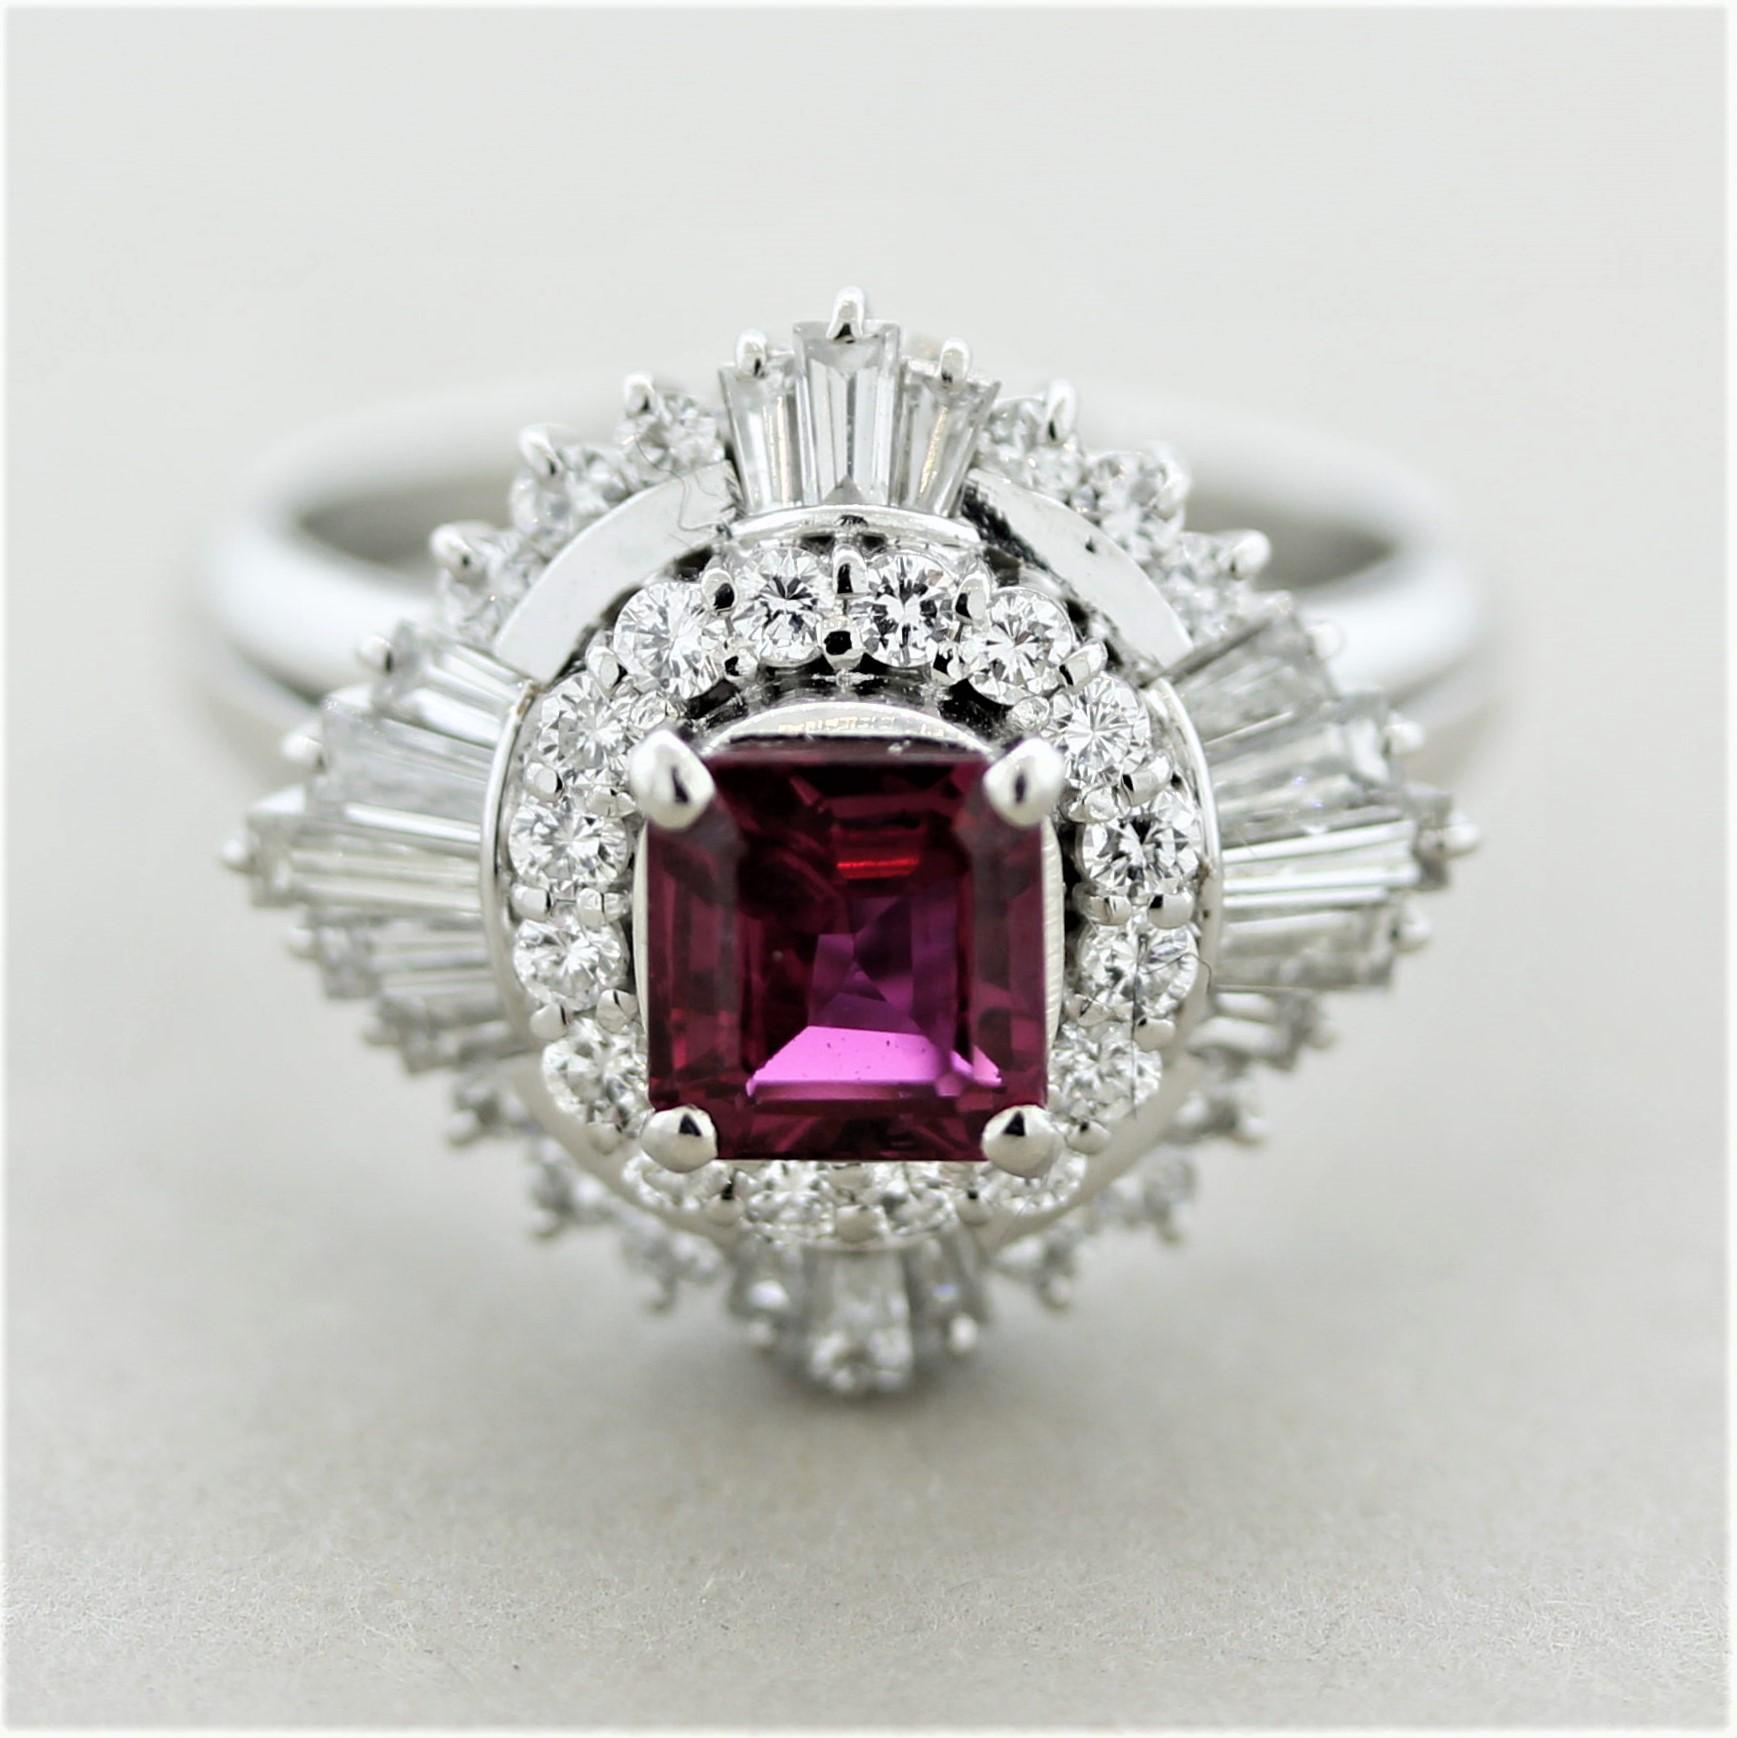 A sweet and stylish ring featuring a fine 1.02 carat square-shaped ruby. It has a bright and intense slightly purplish red color that is extremely fine. It is accented by 1 carat of round brilliant and baguette-cut diamonds set in a stylish design